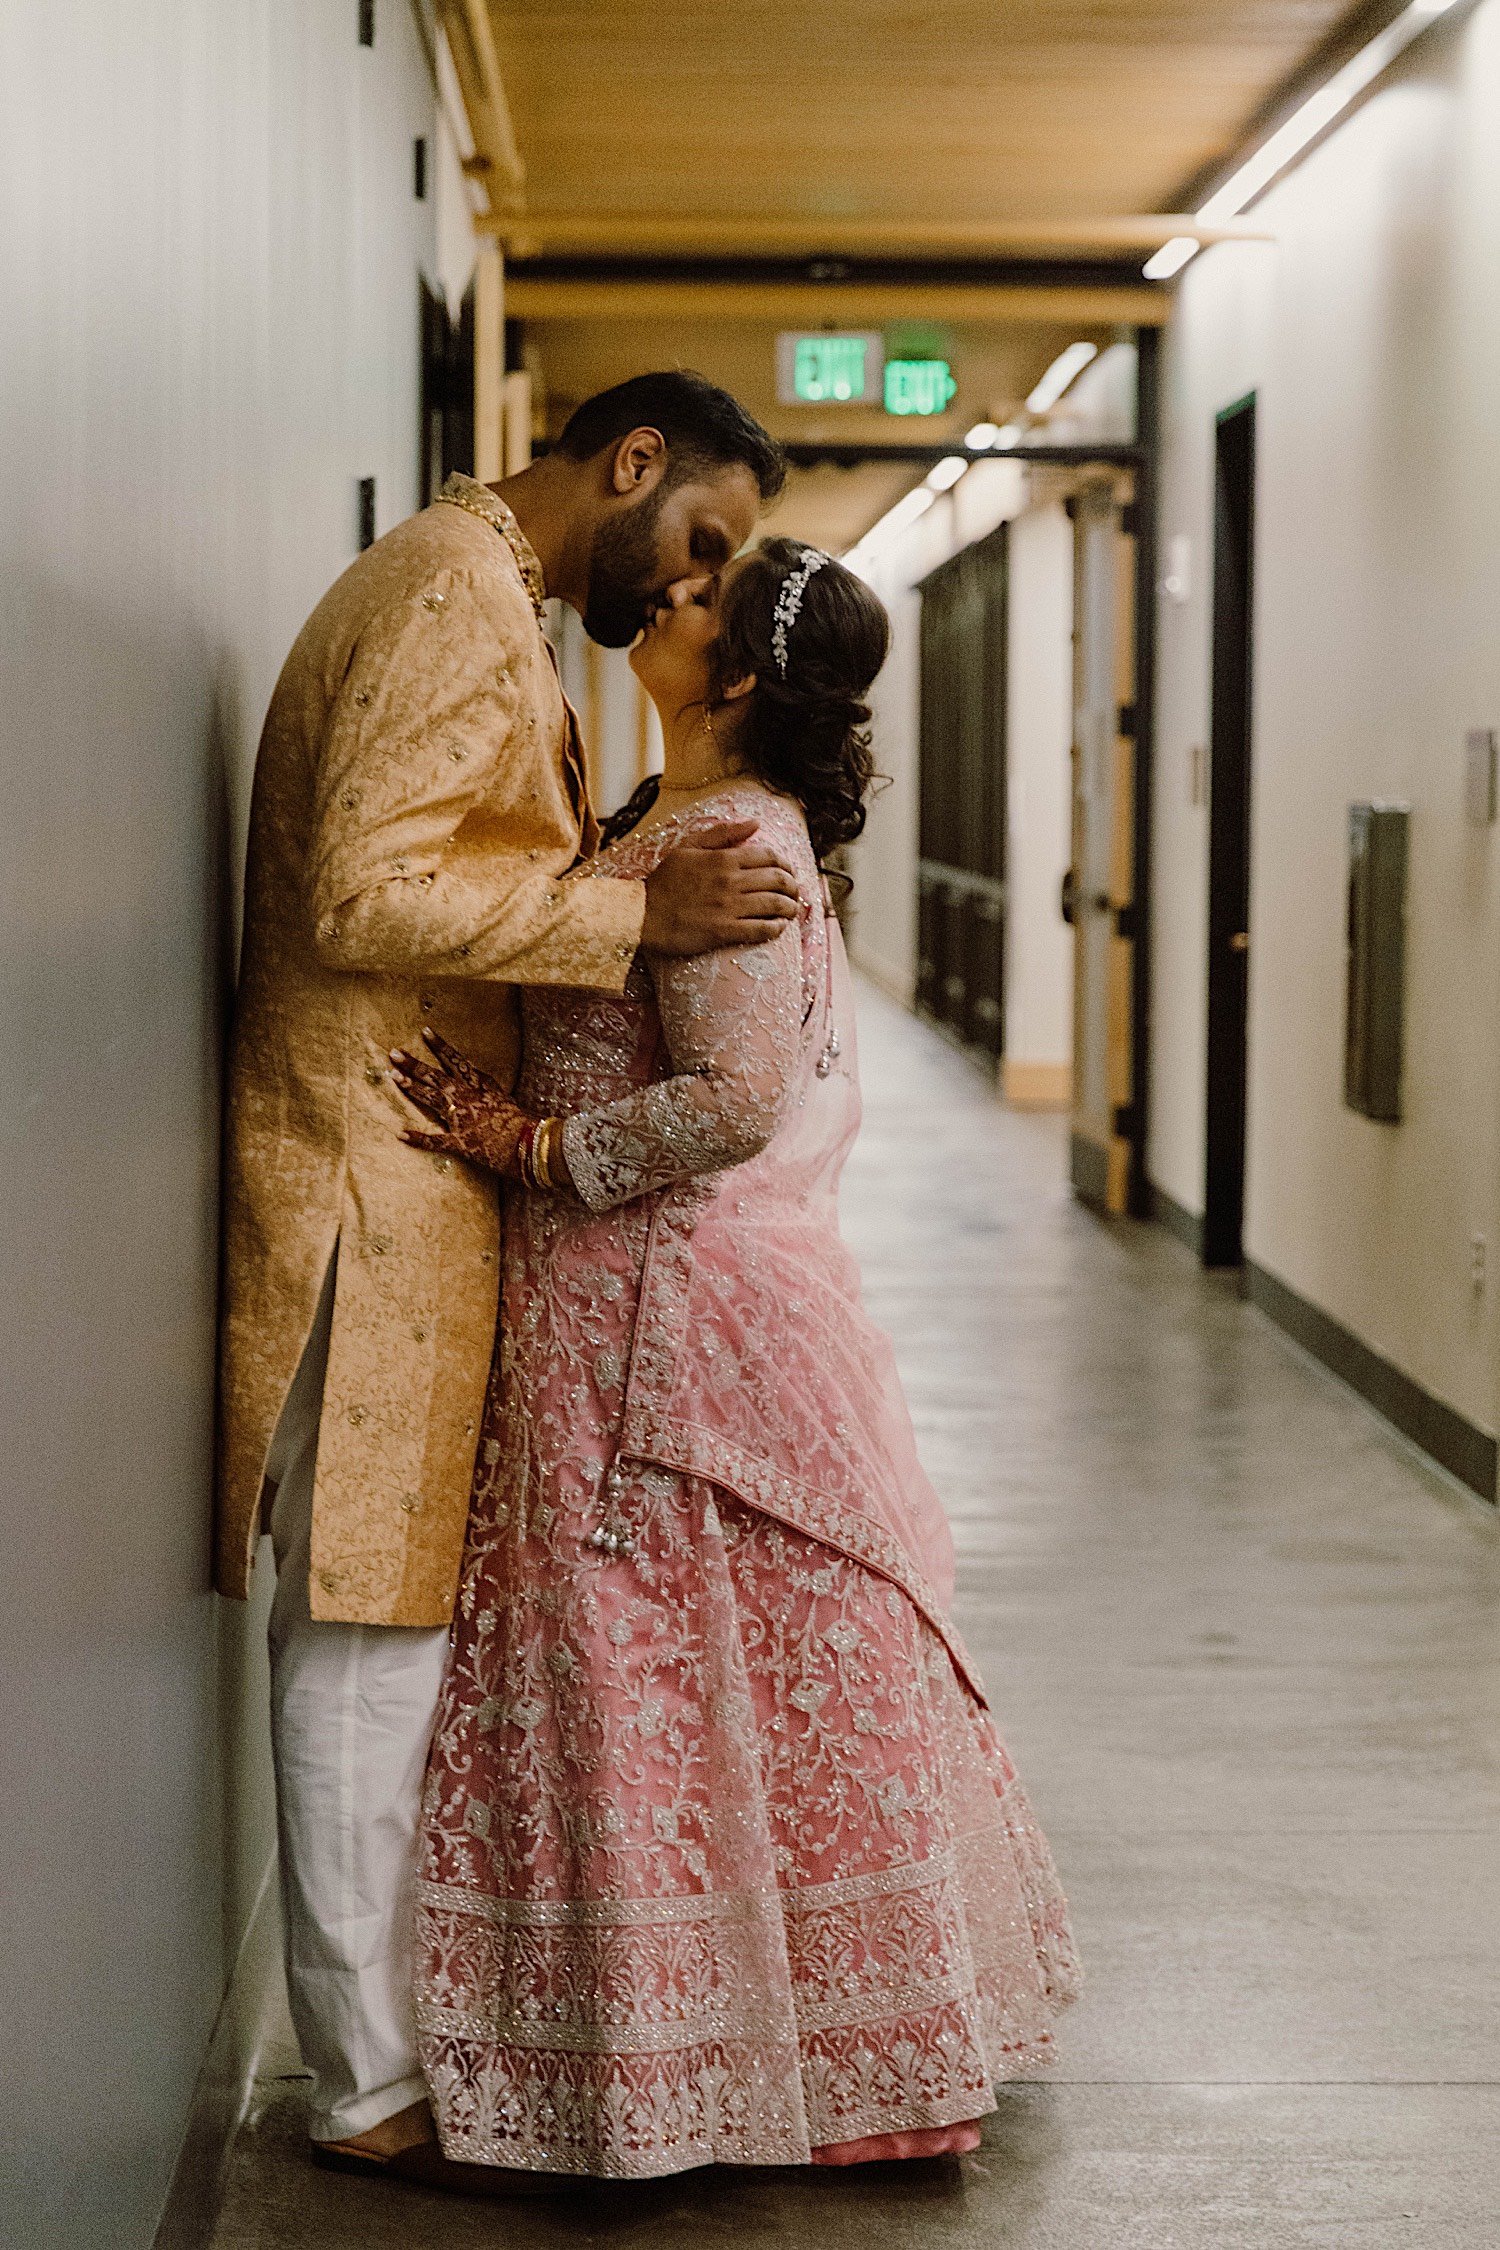 Bride and groom kiss in hallway of venue away from everyone